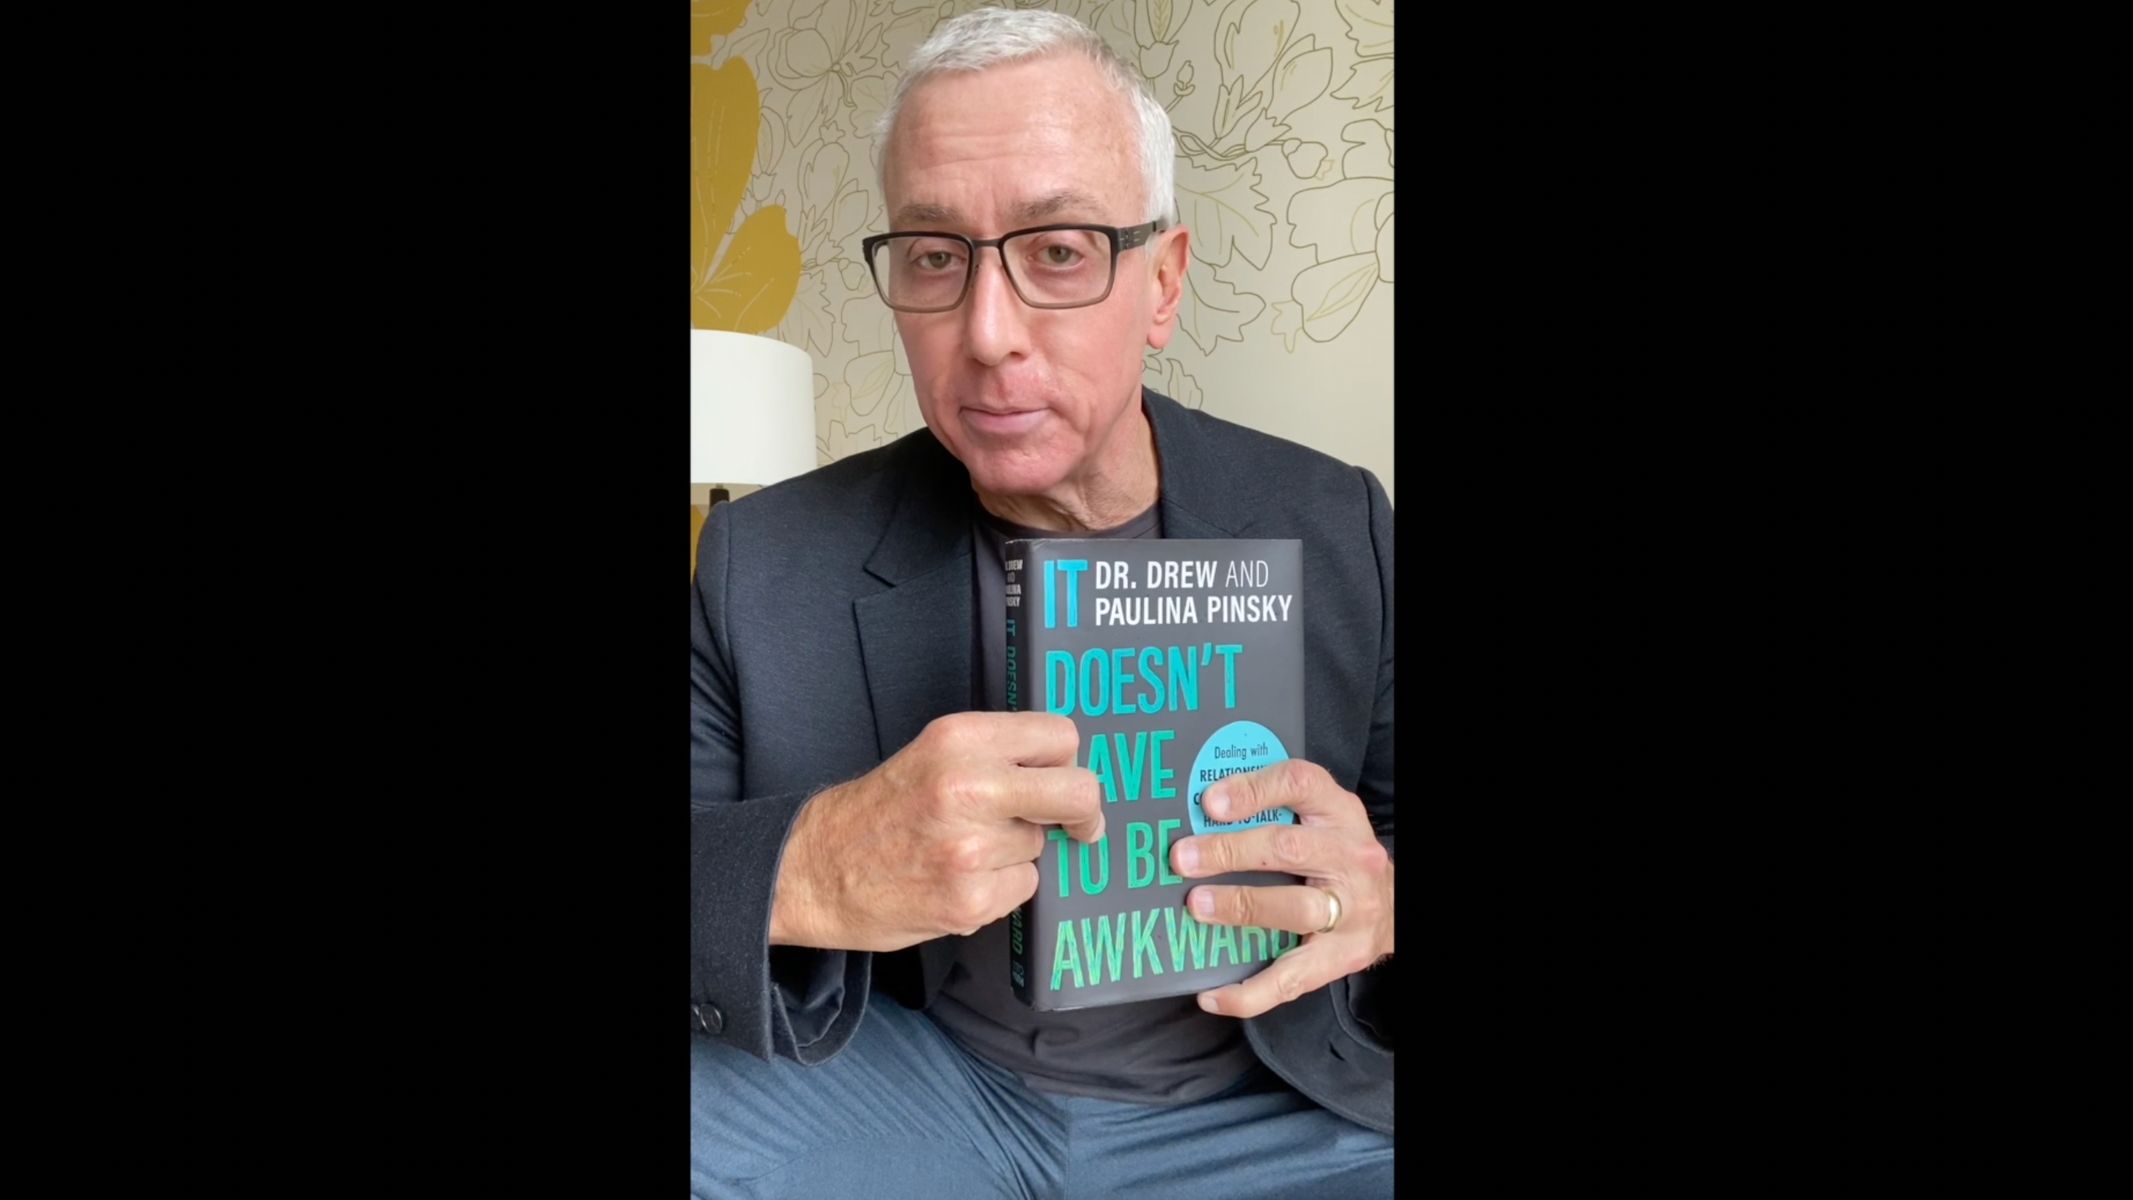 Dr. Drew's New Book - Signed by Dr. Drew